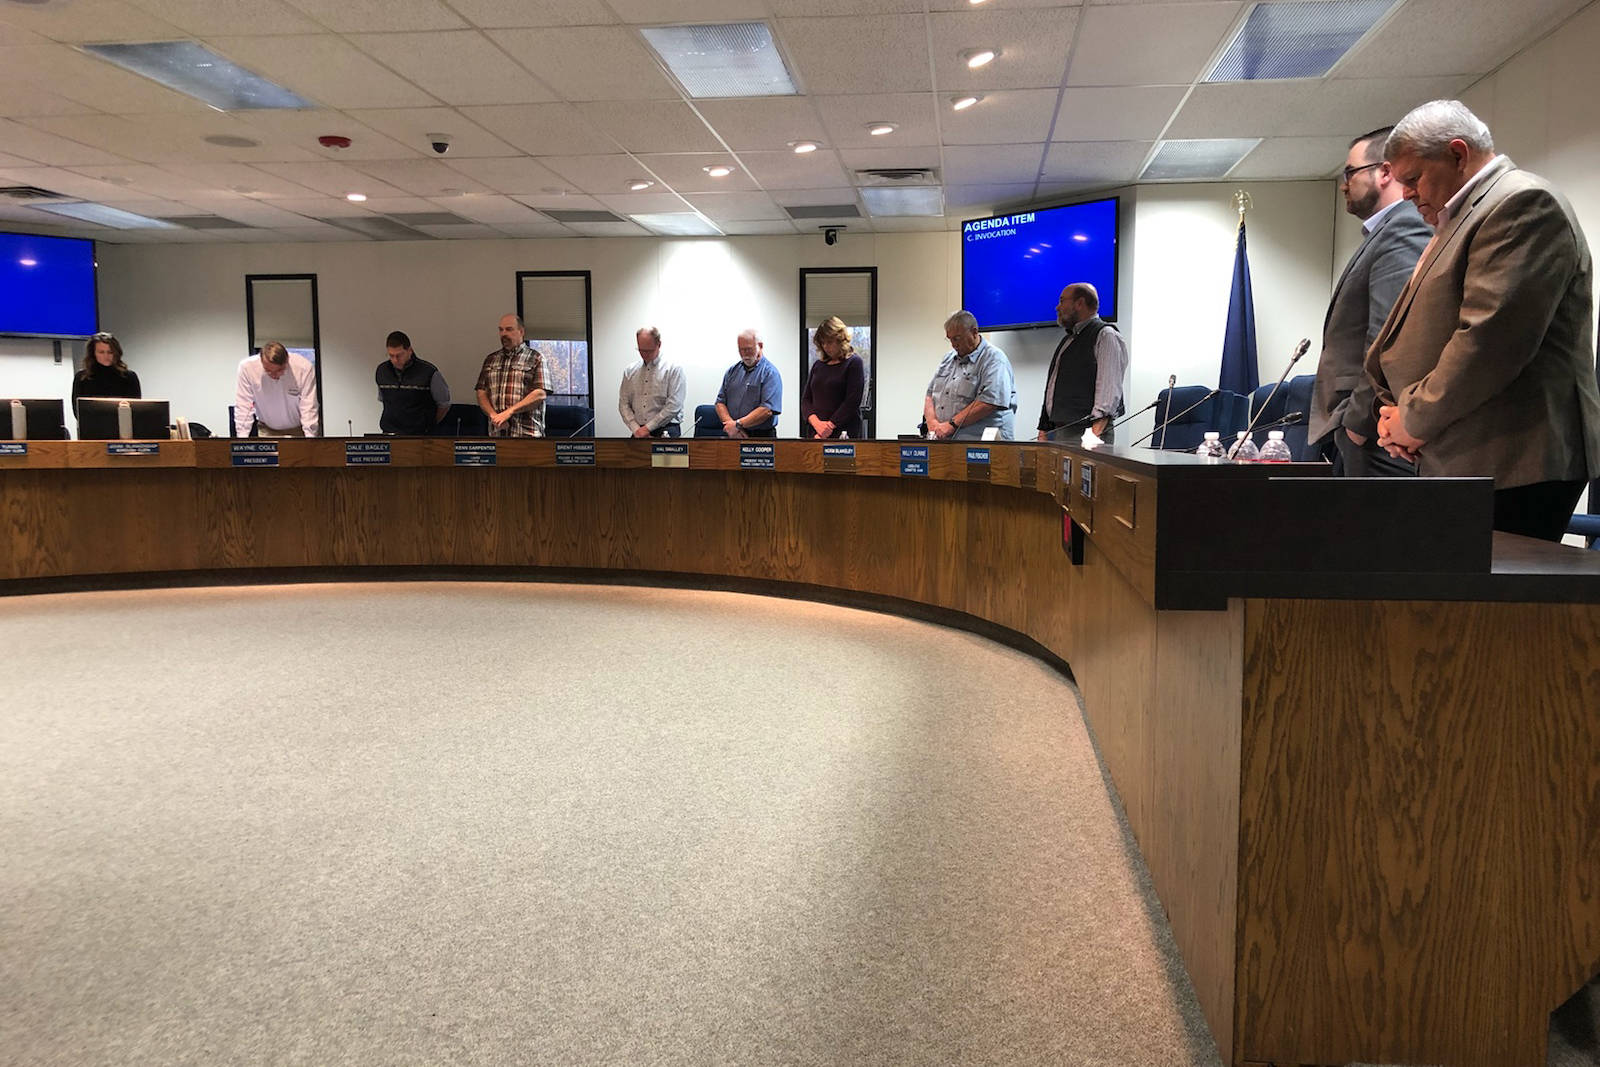 Members of the Kenai Peninsula Borough Assembly hold a religious invocation during Tuesday night’s assembly meeting in Soldotna. The invocation was held only hours after the Alaska Superior Court ruled the ritual violated the Alaska Constitution. (Photo by Victoria Petersen/Peninsula Clarion)